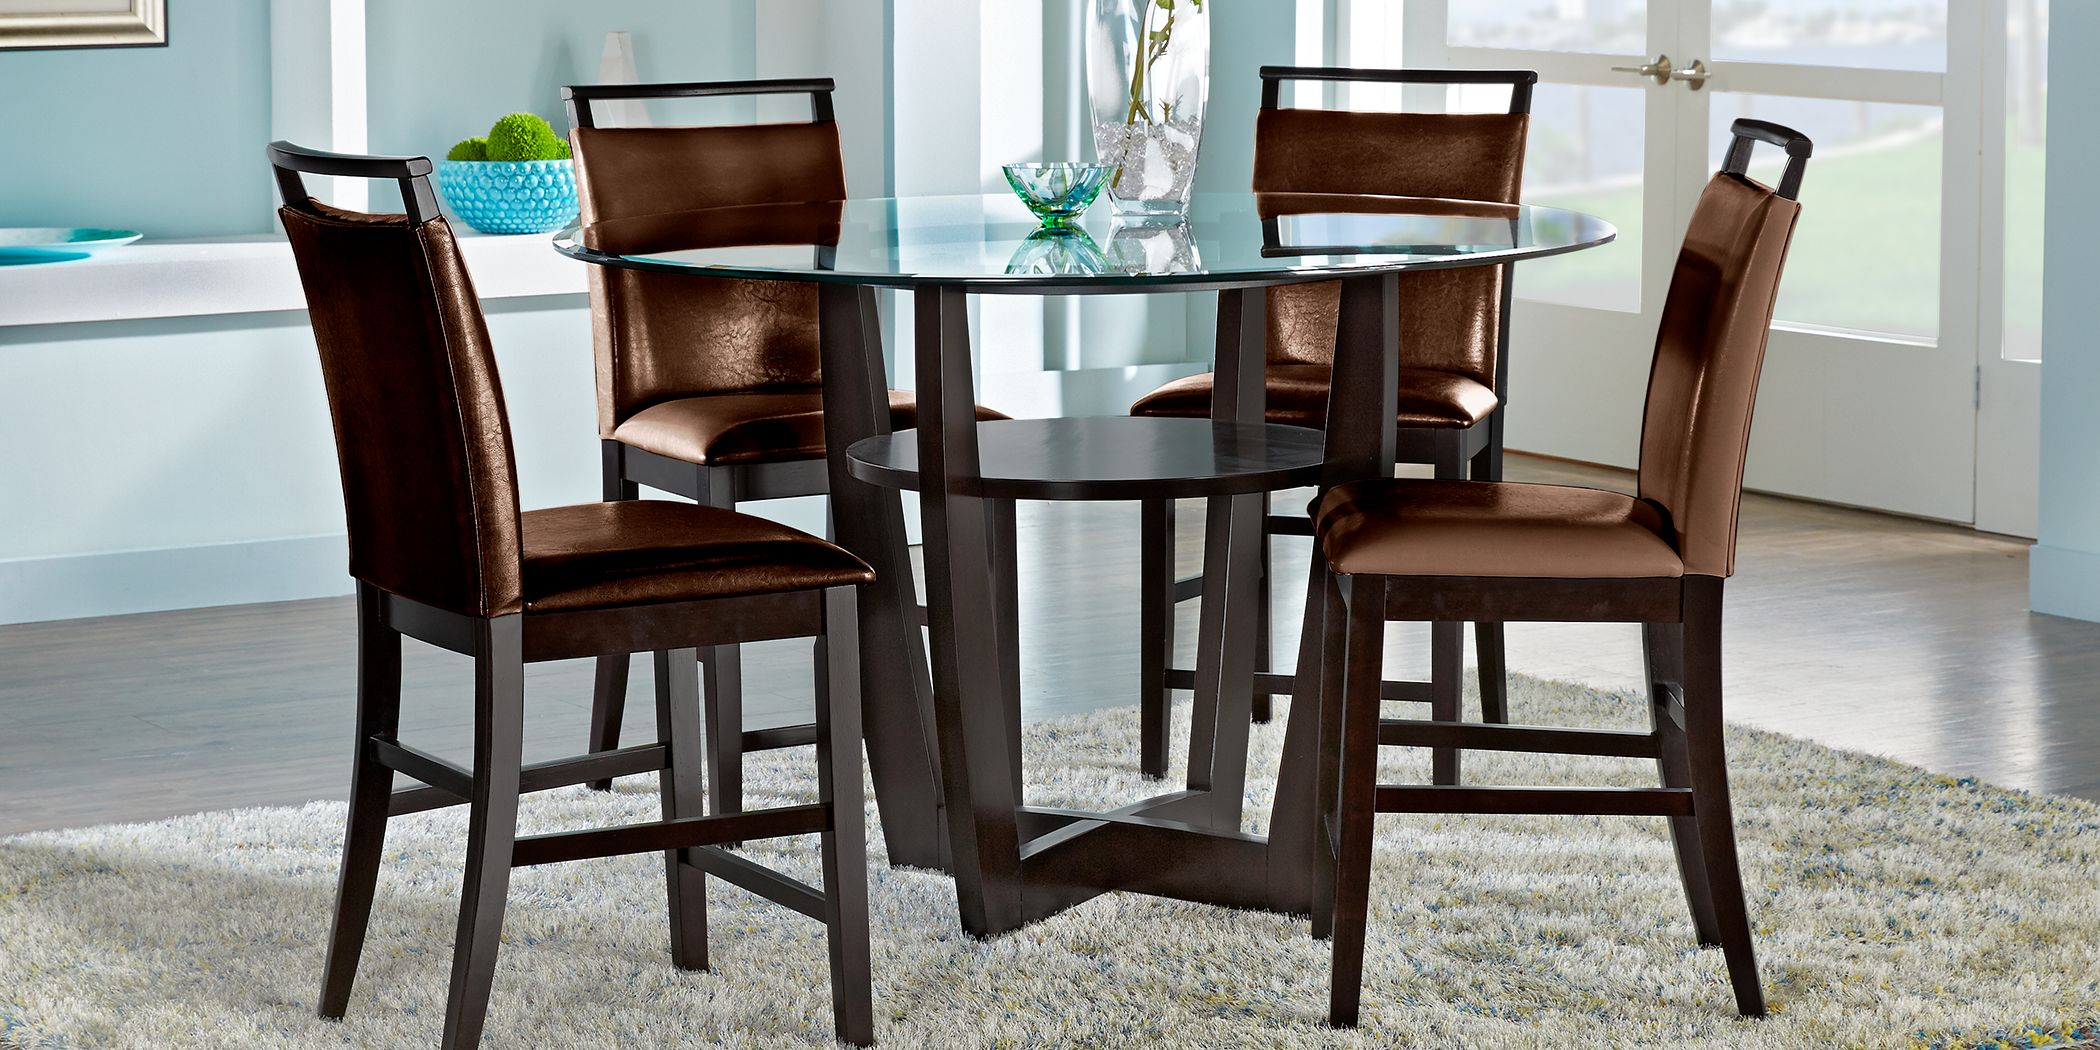 Counter Height Dining Room Table Sets, Tall Round Dining Room Table Set